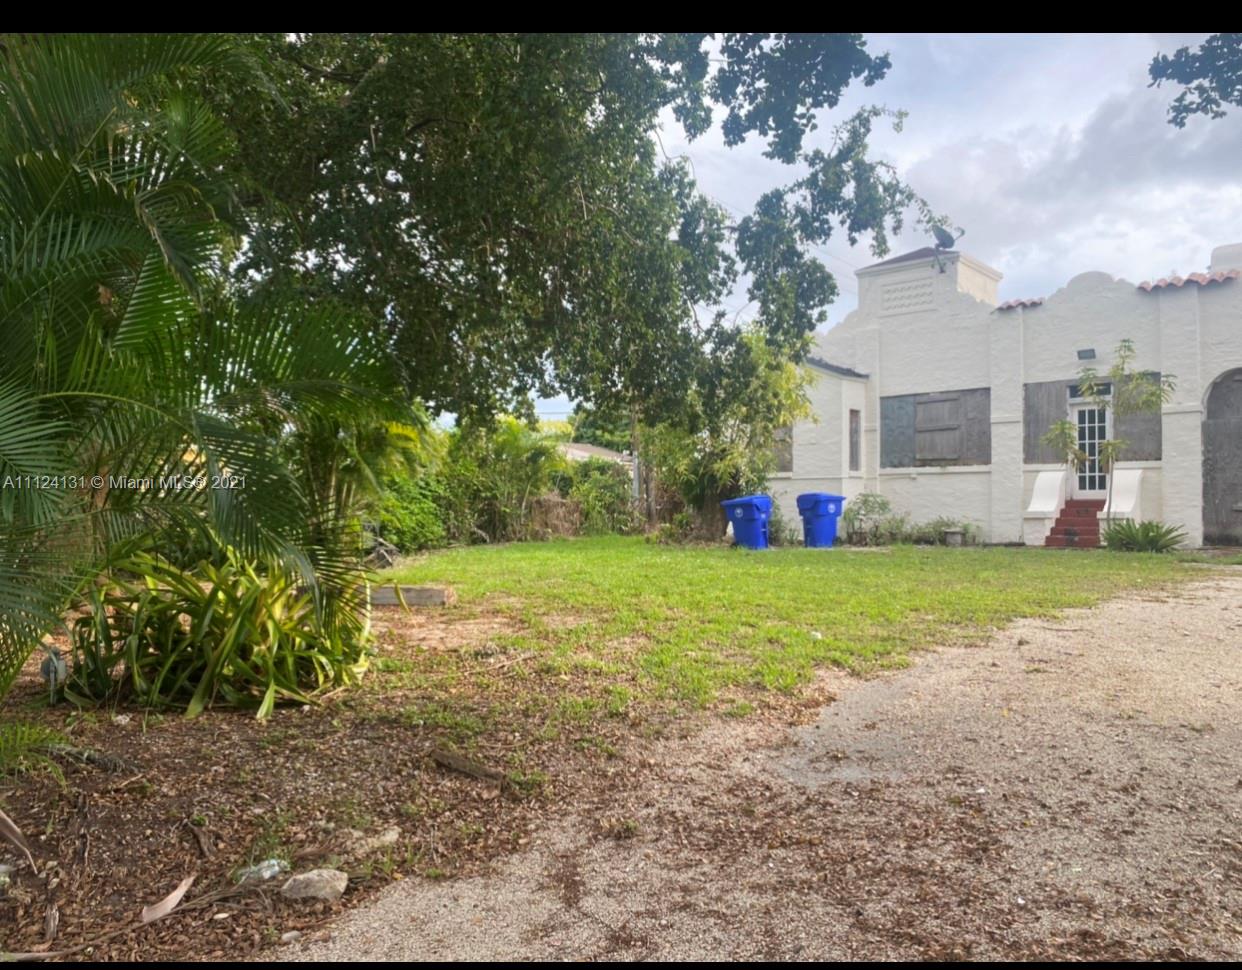 Photo 2 of 3618 16th Ter in Miami - MLS A11124131